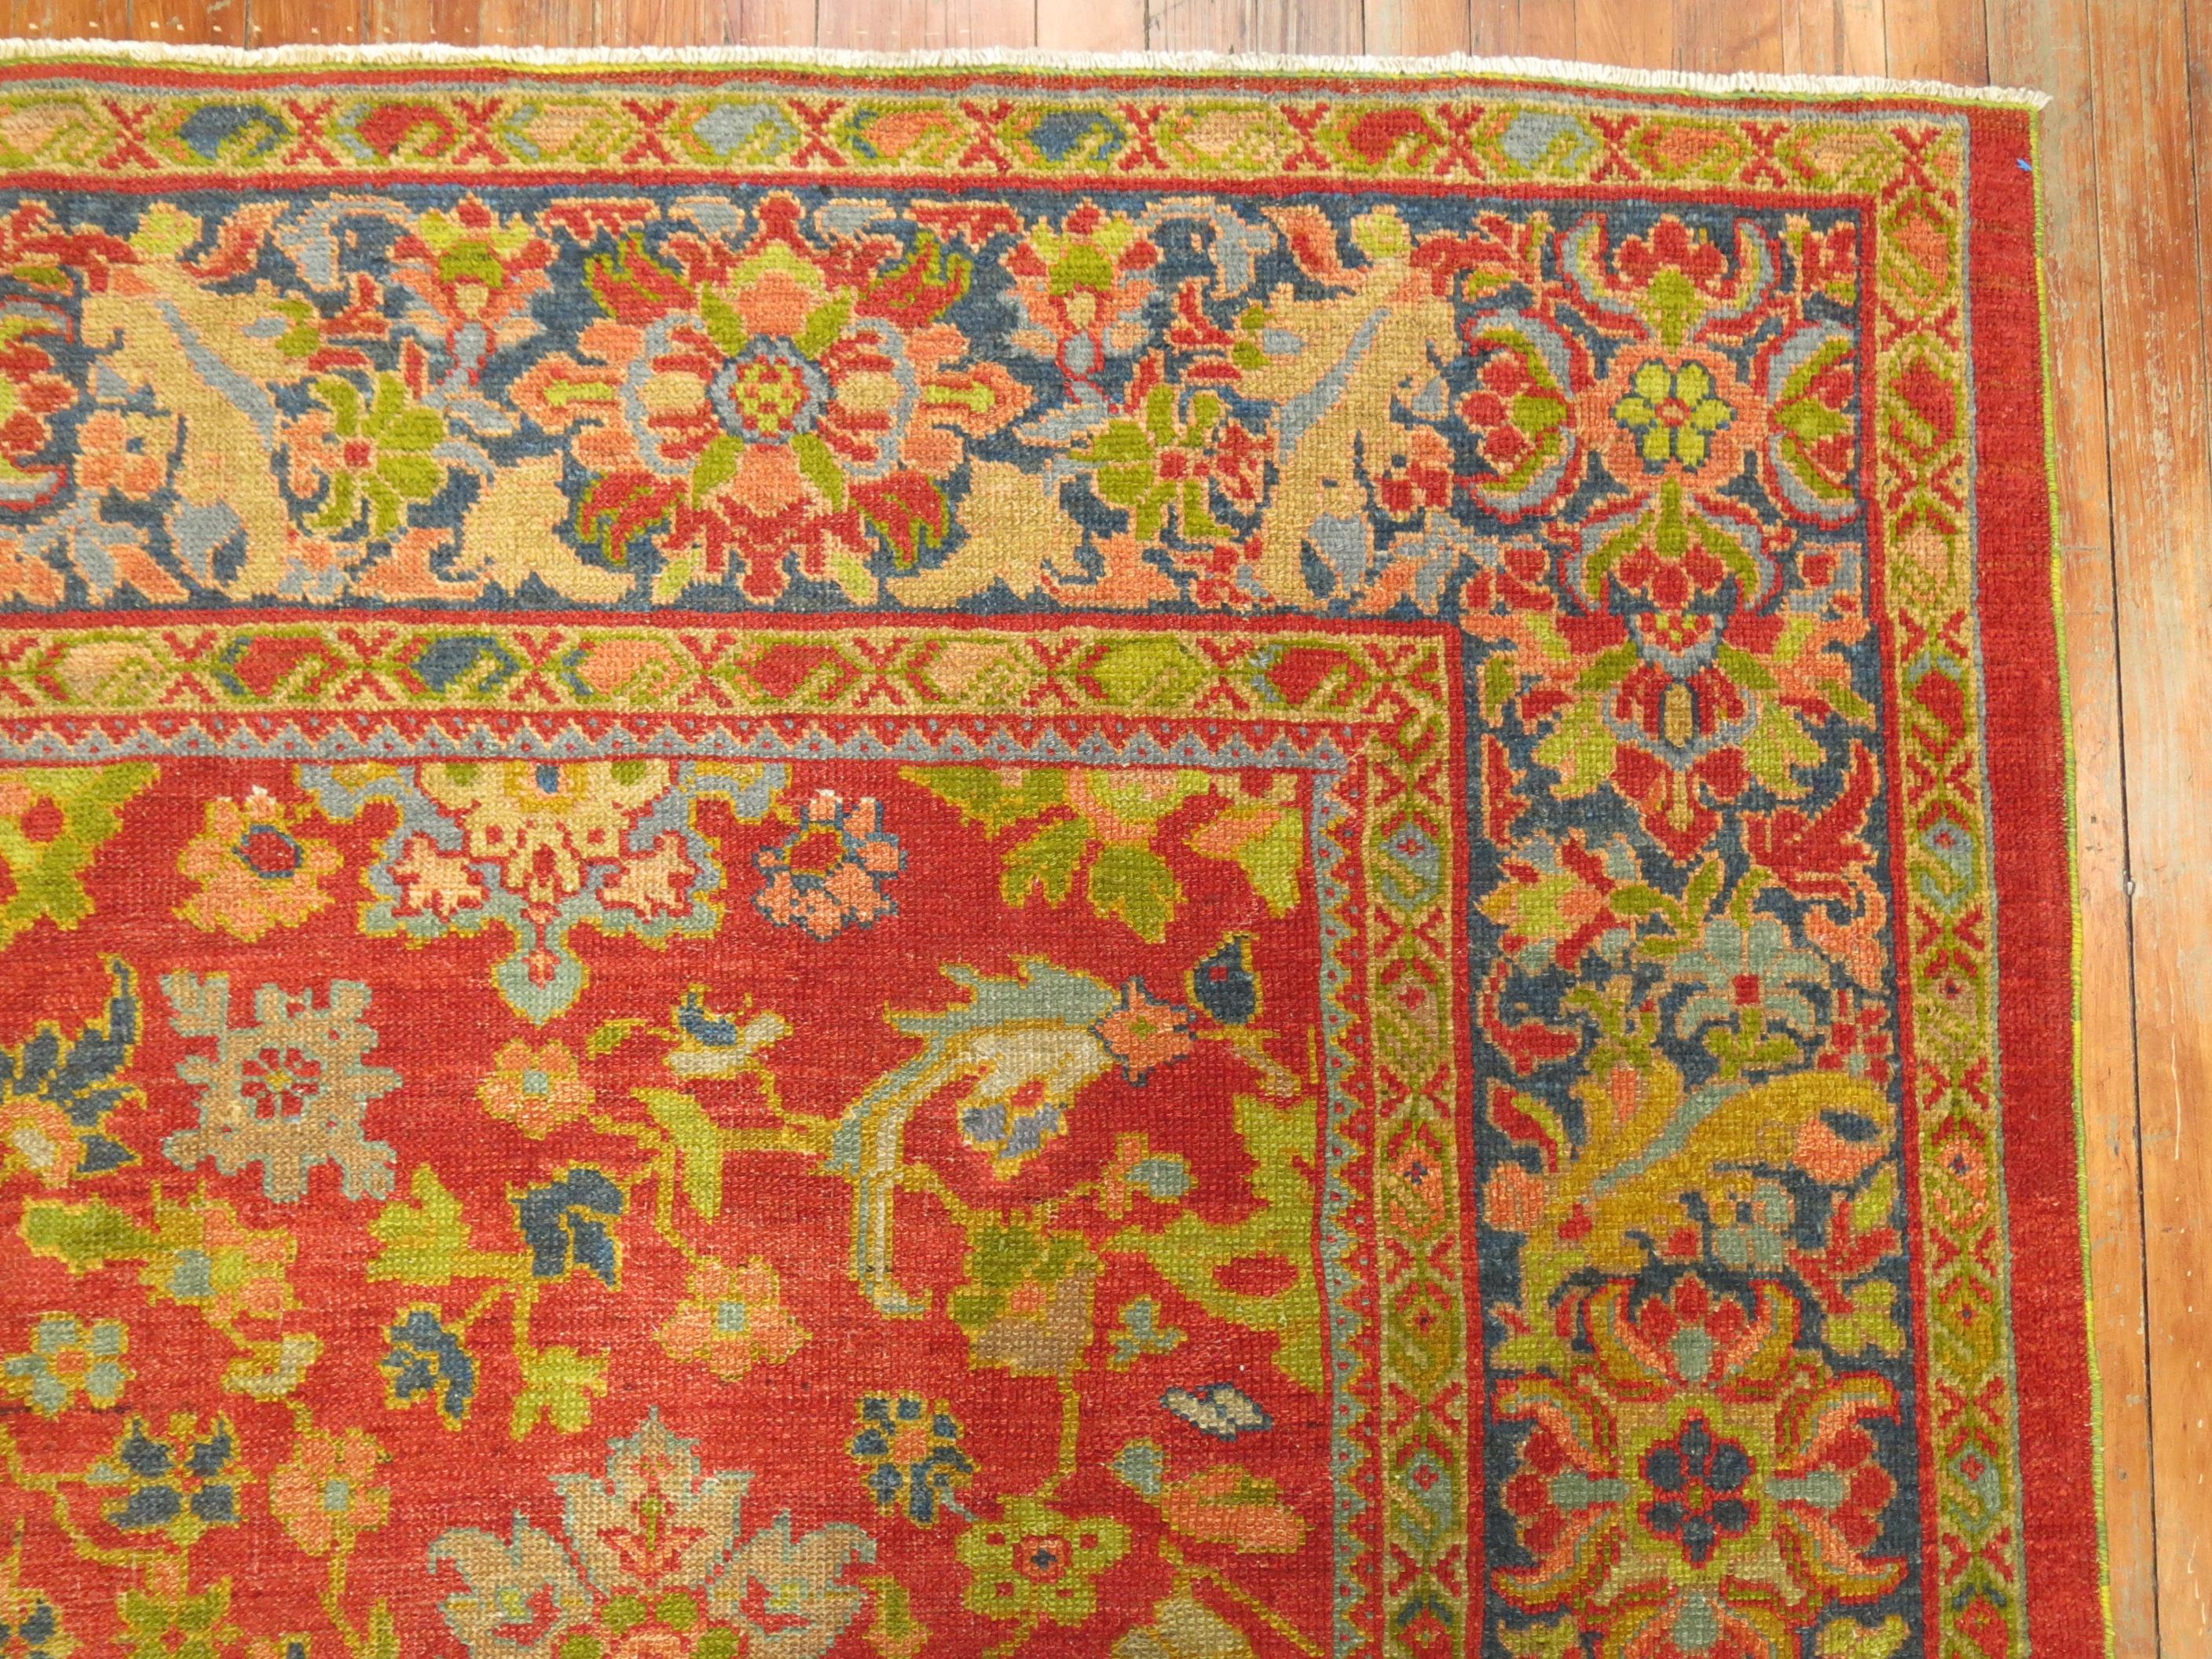 Hand-Woven Antique Persian Sultanabad Carpet